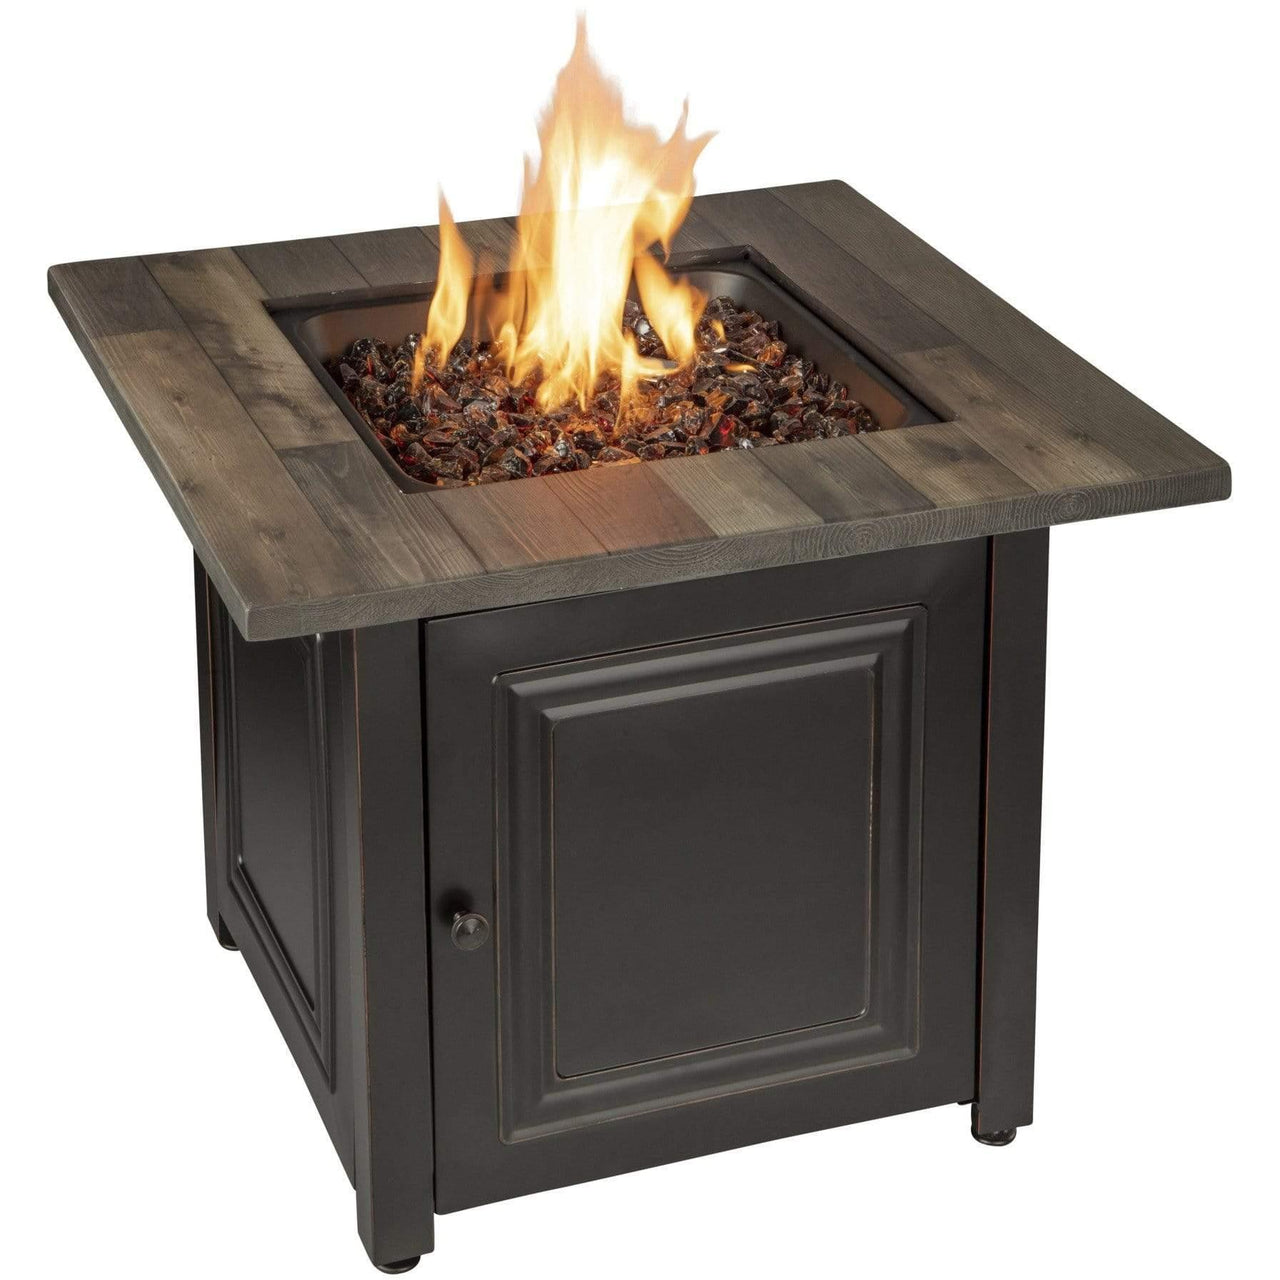 Endless Summer The Burlington, LP Gas Outdoor Fire Pit with Printed Resin Mantel - GAD15285SP - Fire Pit Stock